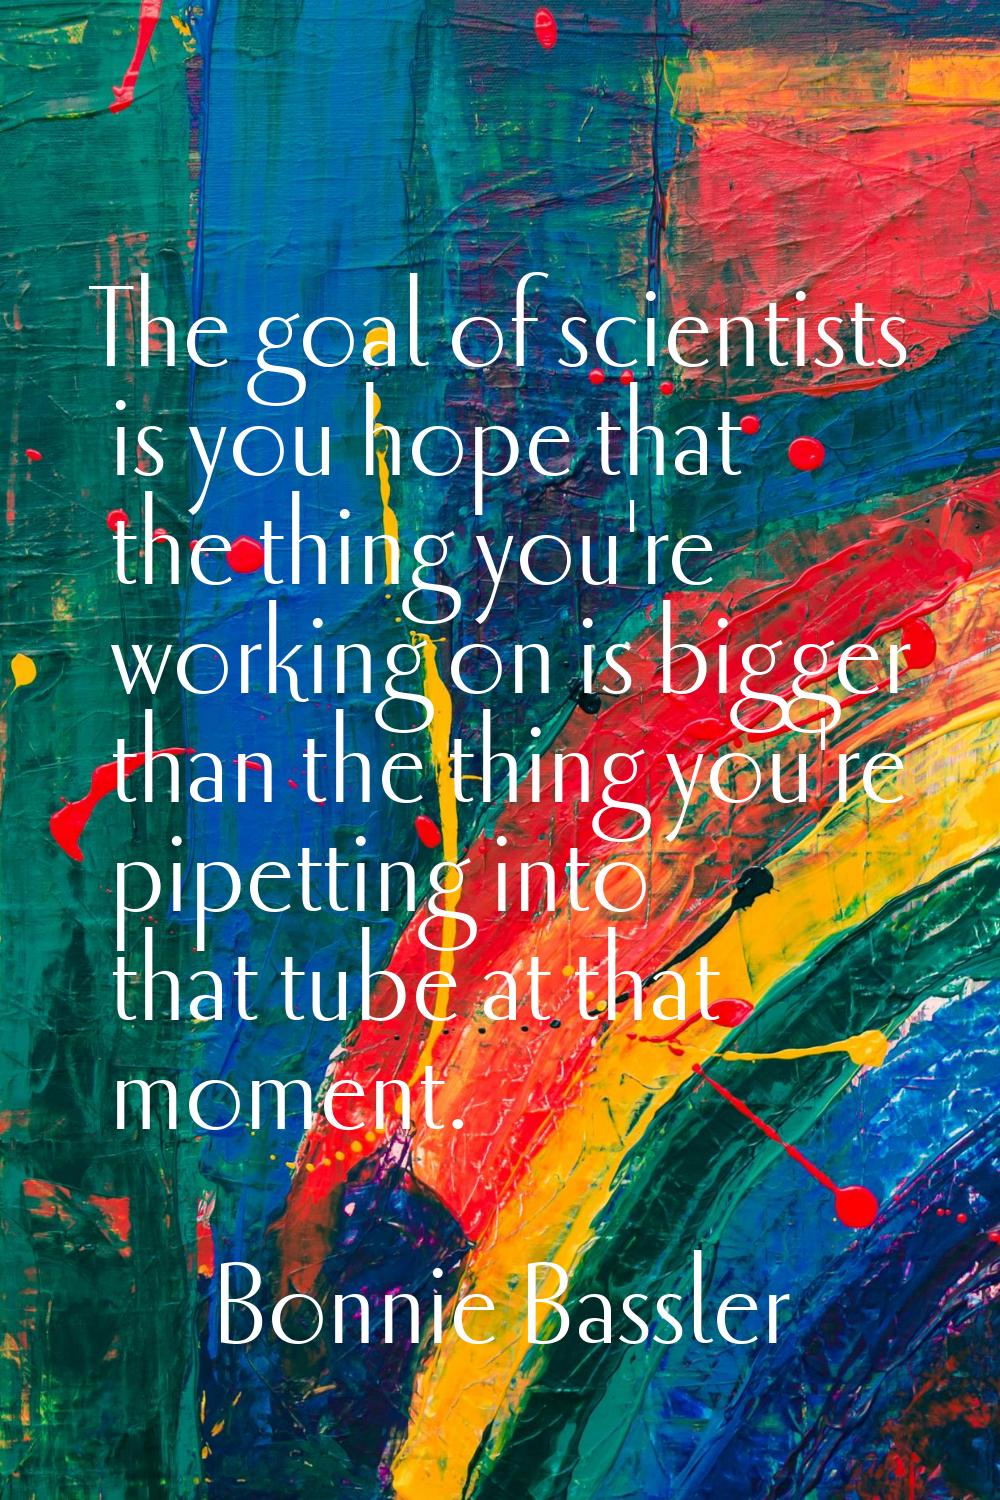 The goal of scientists is you hope that the thing you're working on is bigger than the thing you're